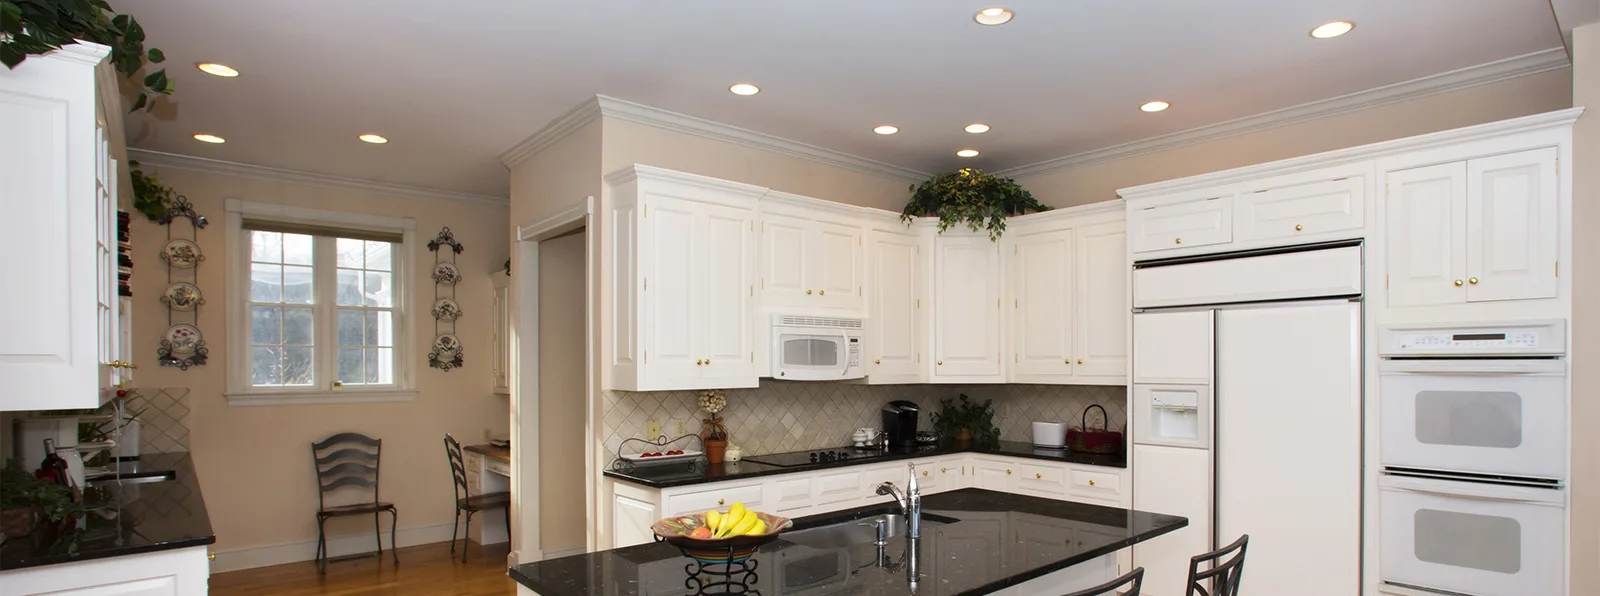 A kitchen with recessed lights